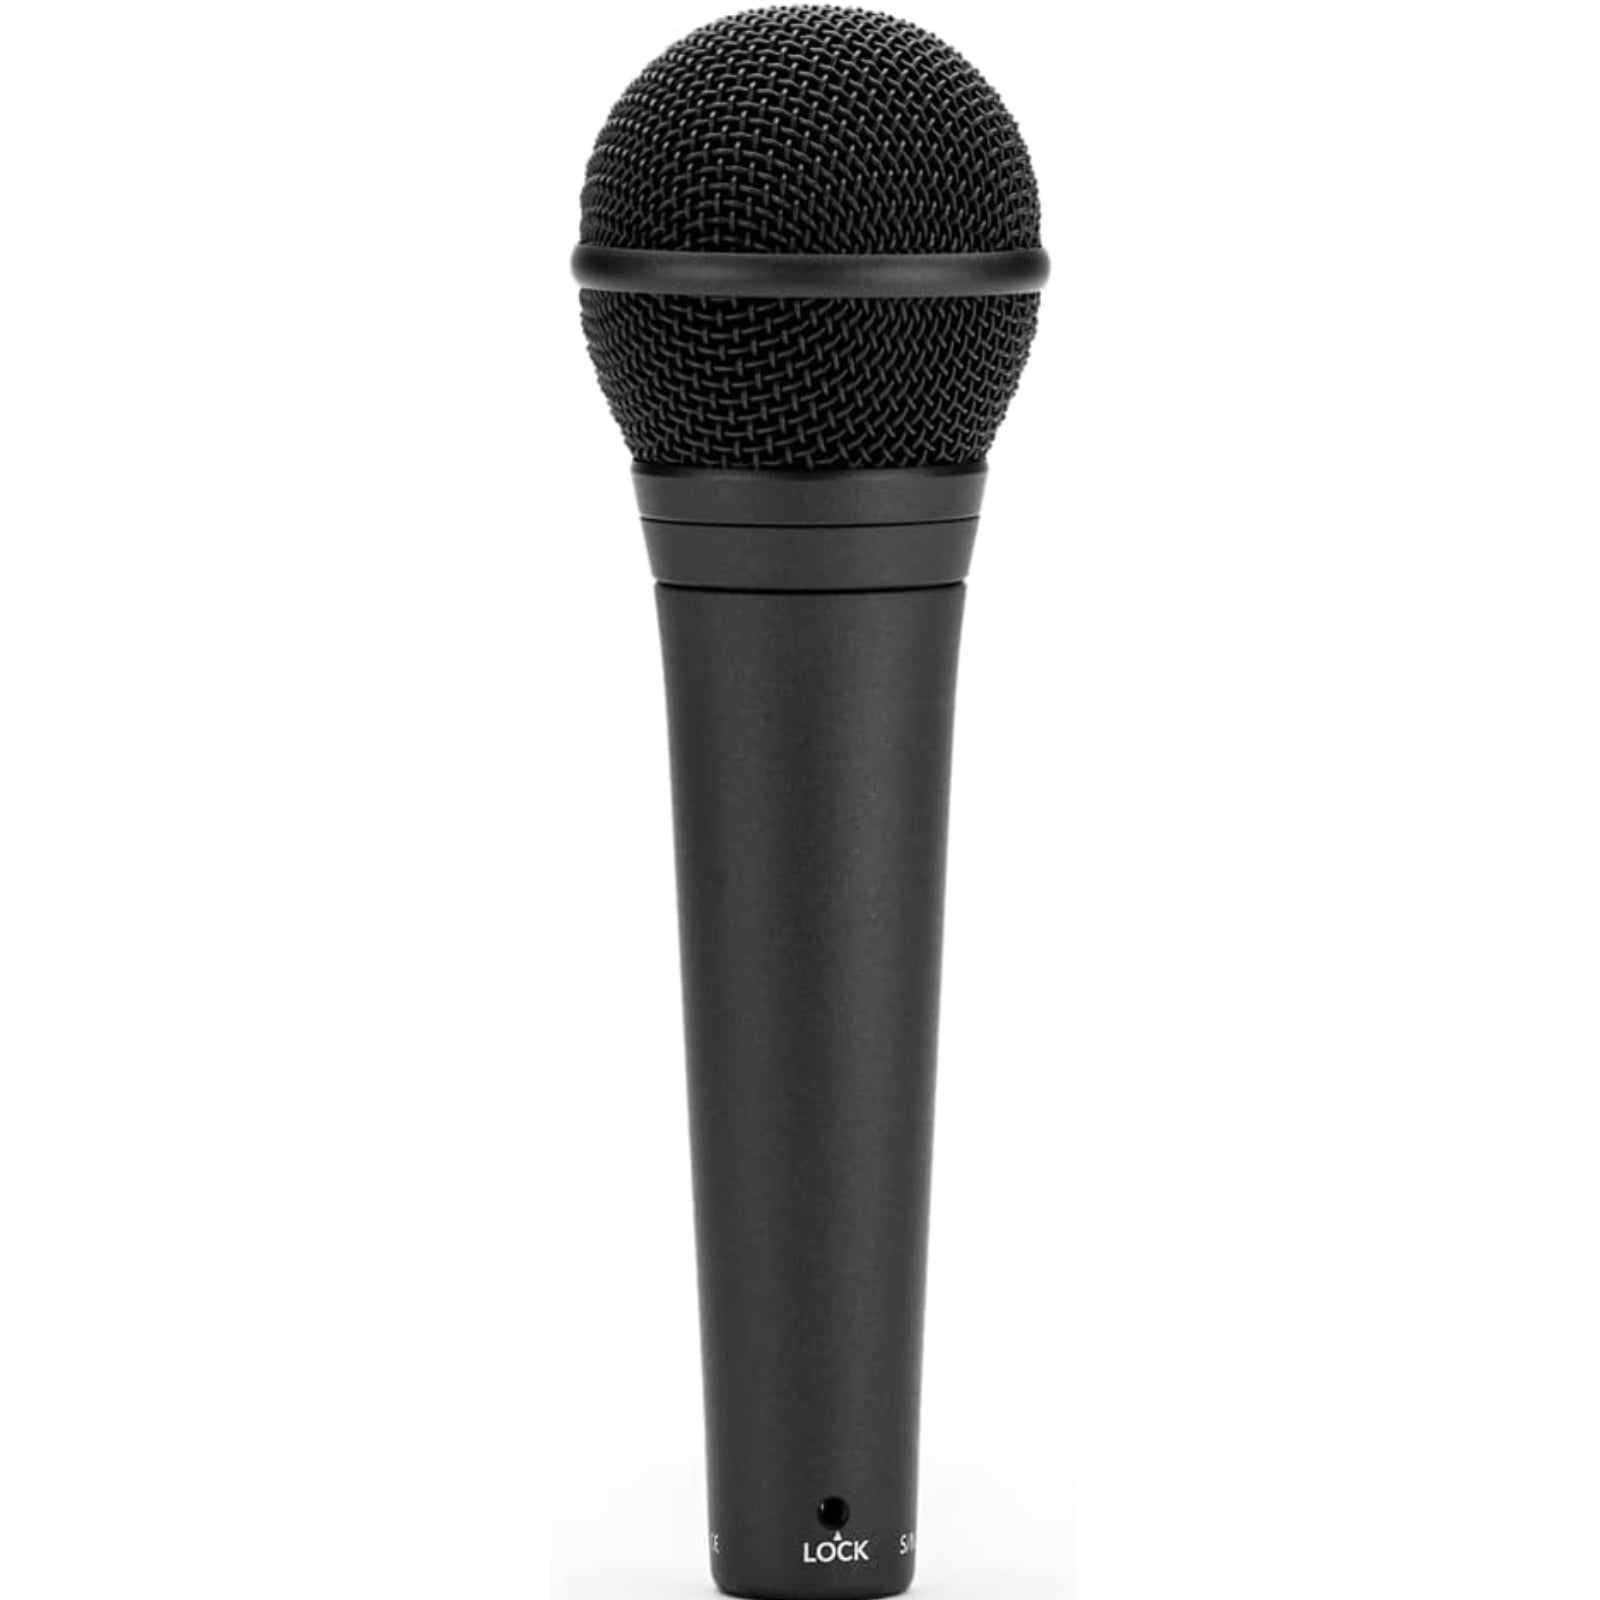 Rode M1 Handheld Cardioid Dynamic Microphone - MyMobile